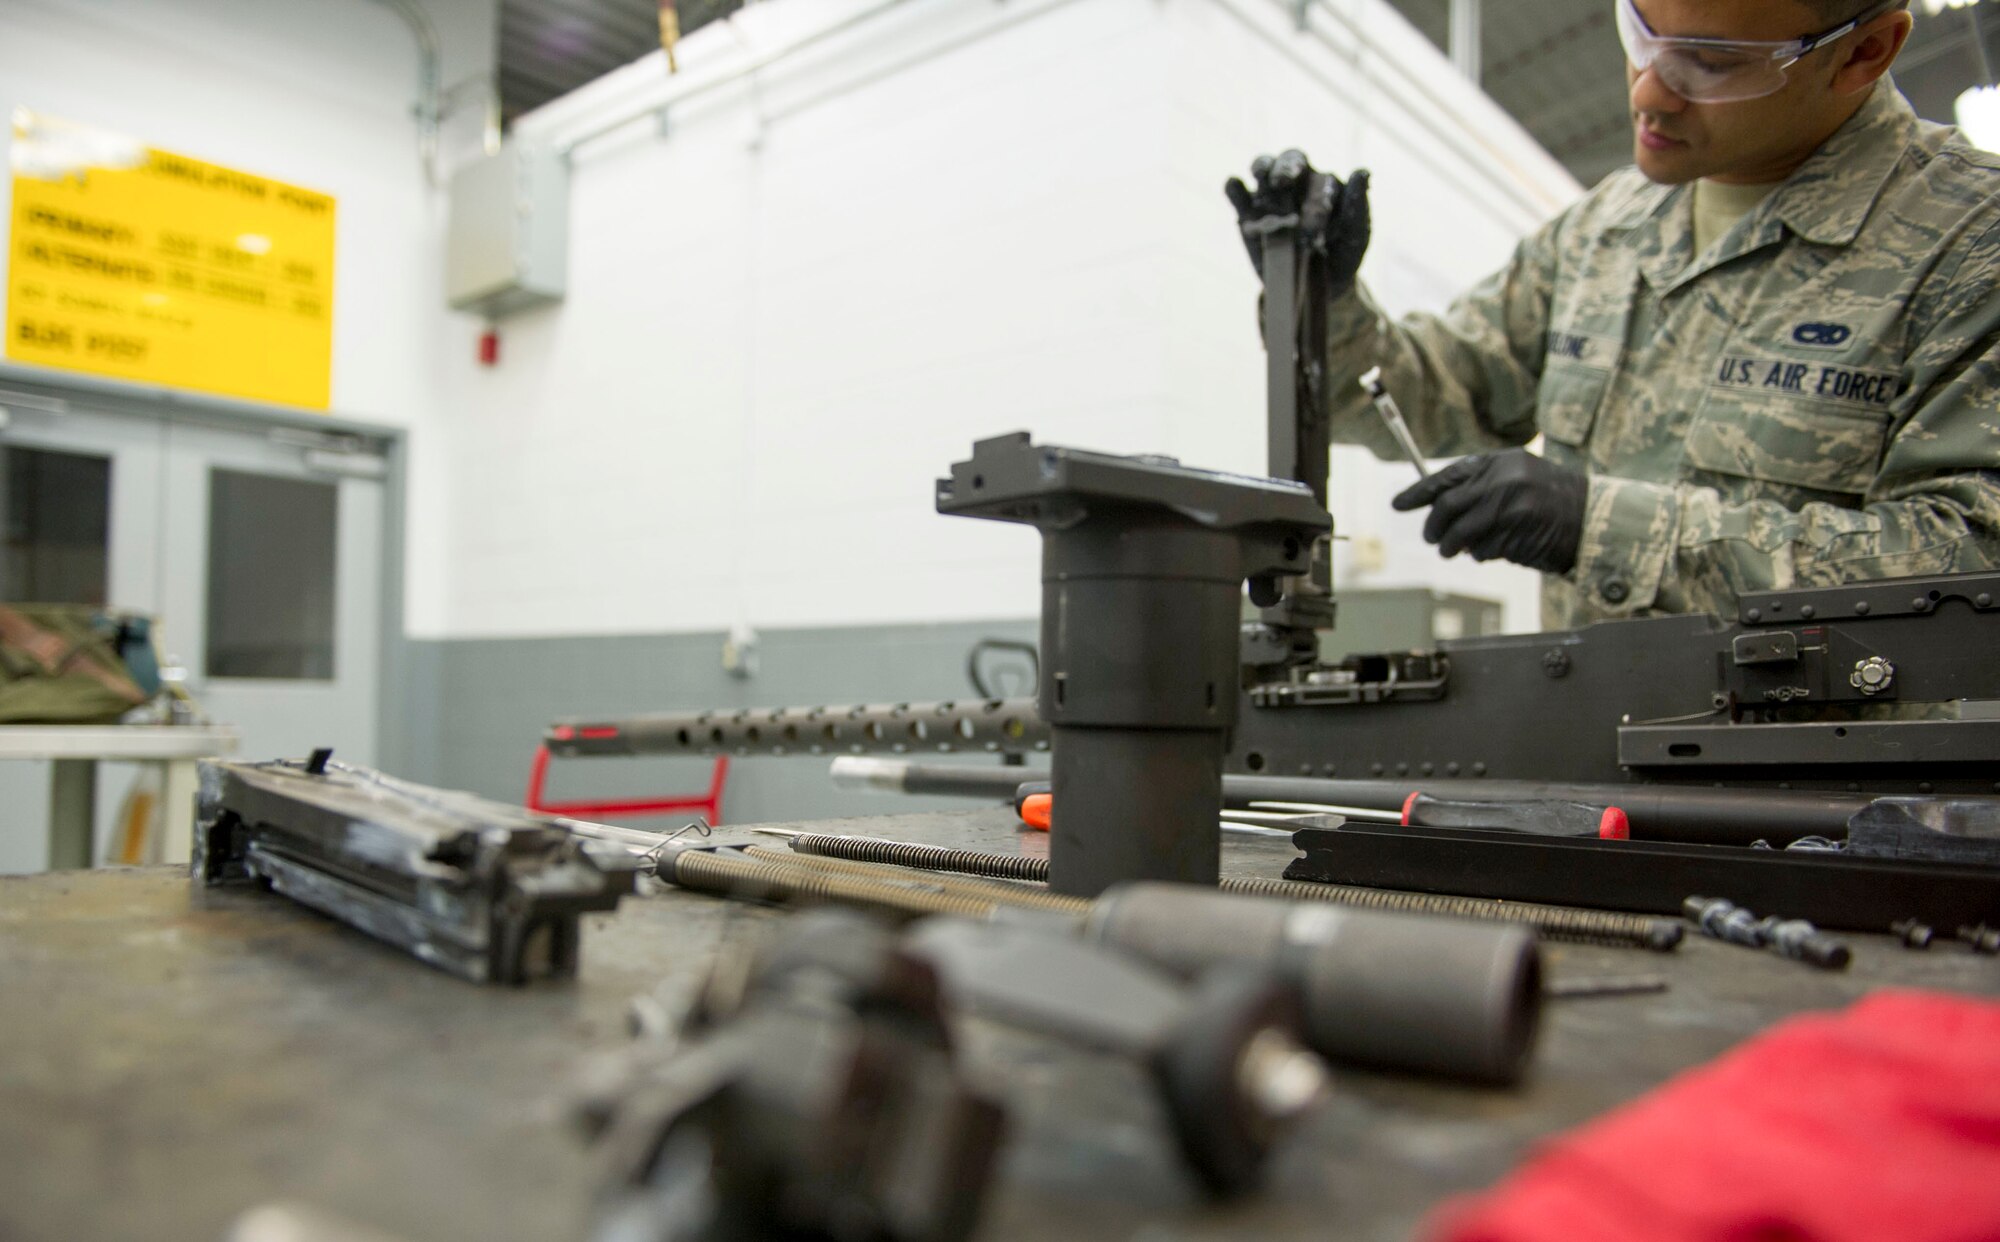 Parts of a 50-caliber machine gun lay on a table after being taken apart and lubricated at Hurlburt Field, Fla., May 17, 2016. Every 28 days the weapons systems are taken apart, checked, lubricated and put back together. (U.S. Air Force photo by Senior Airman Krystal M. Garrett) 